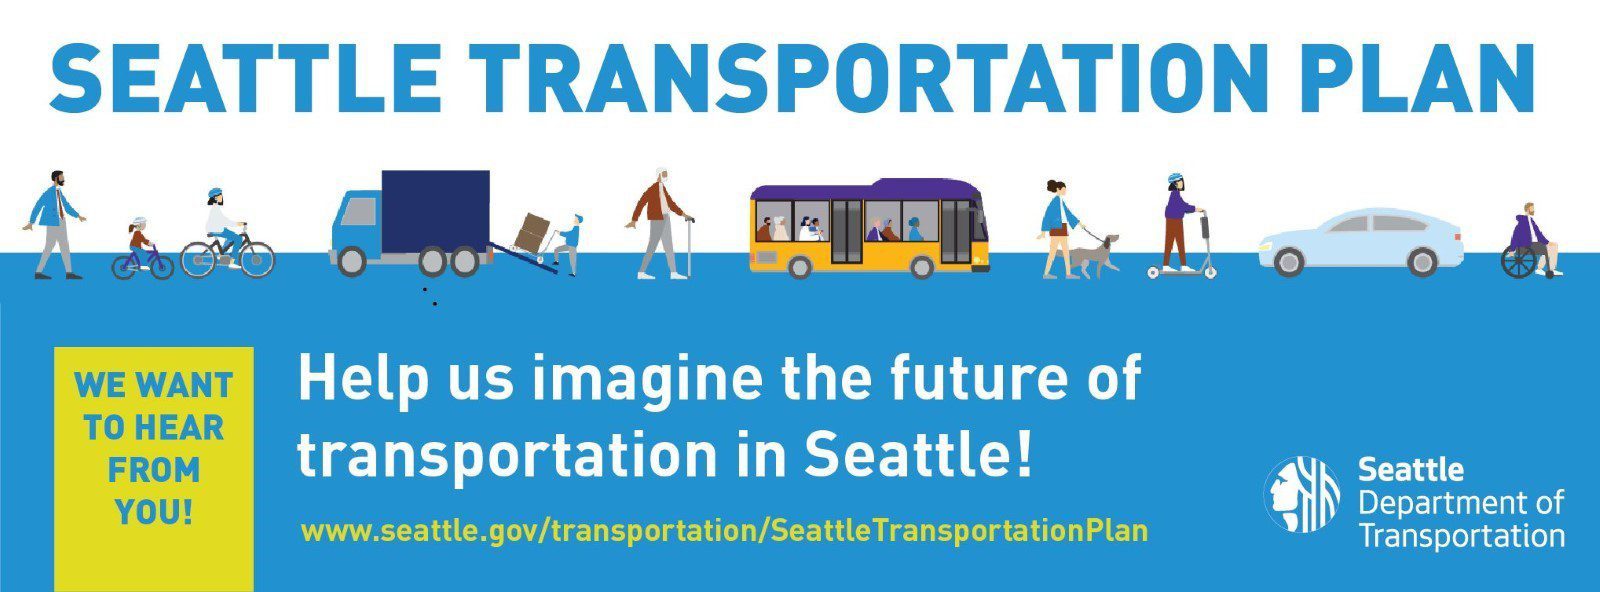 Seattle Transportation Plan: We want to hear from you! Help us imagine the future of transportation in Seattle! www.seattle.gov/transportation/SeattleTransportationPlan